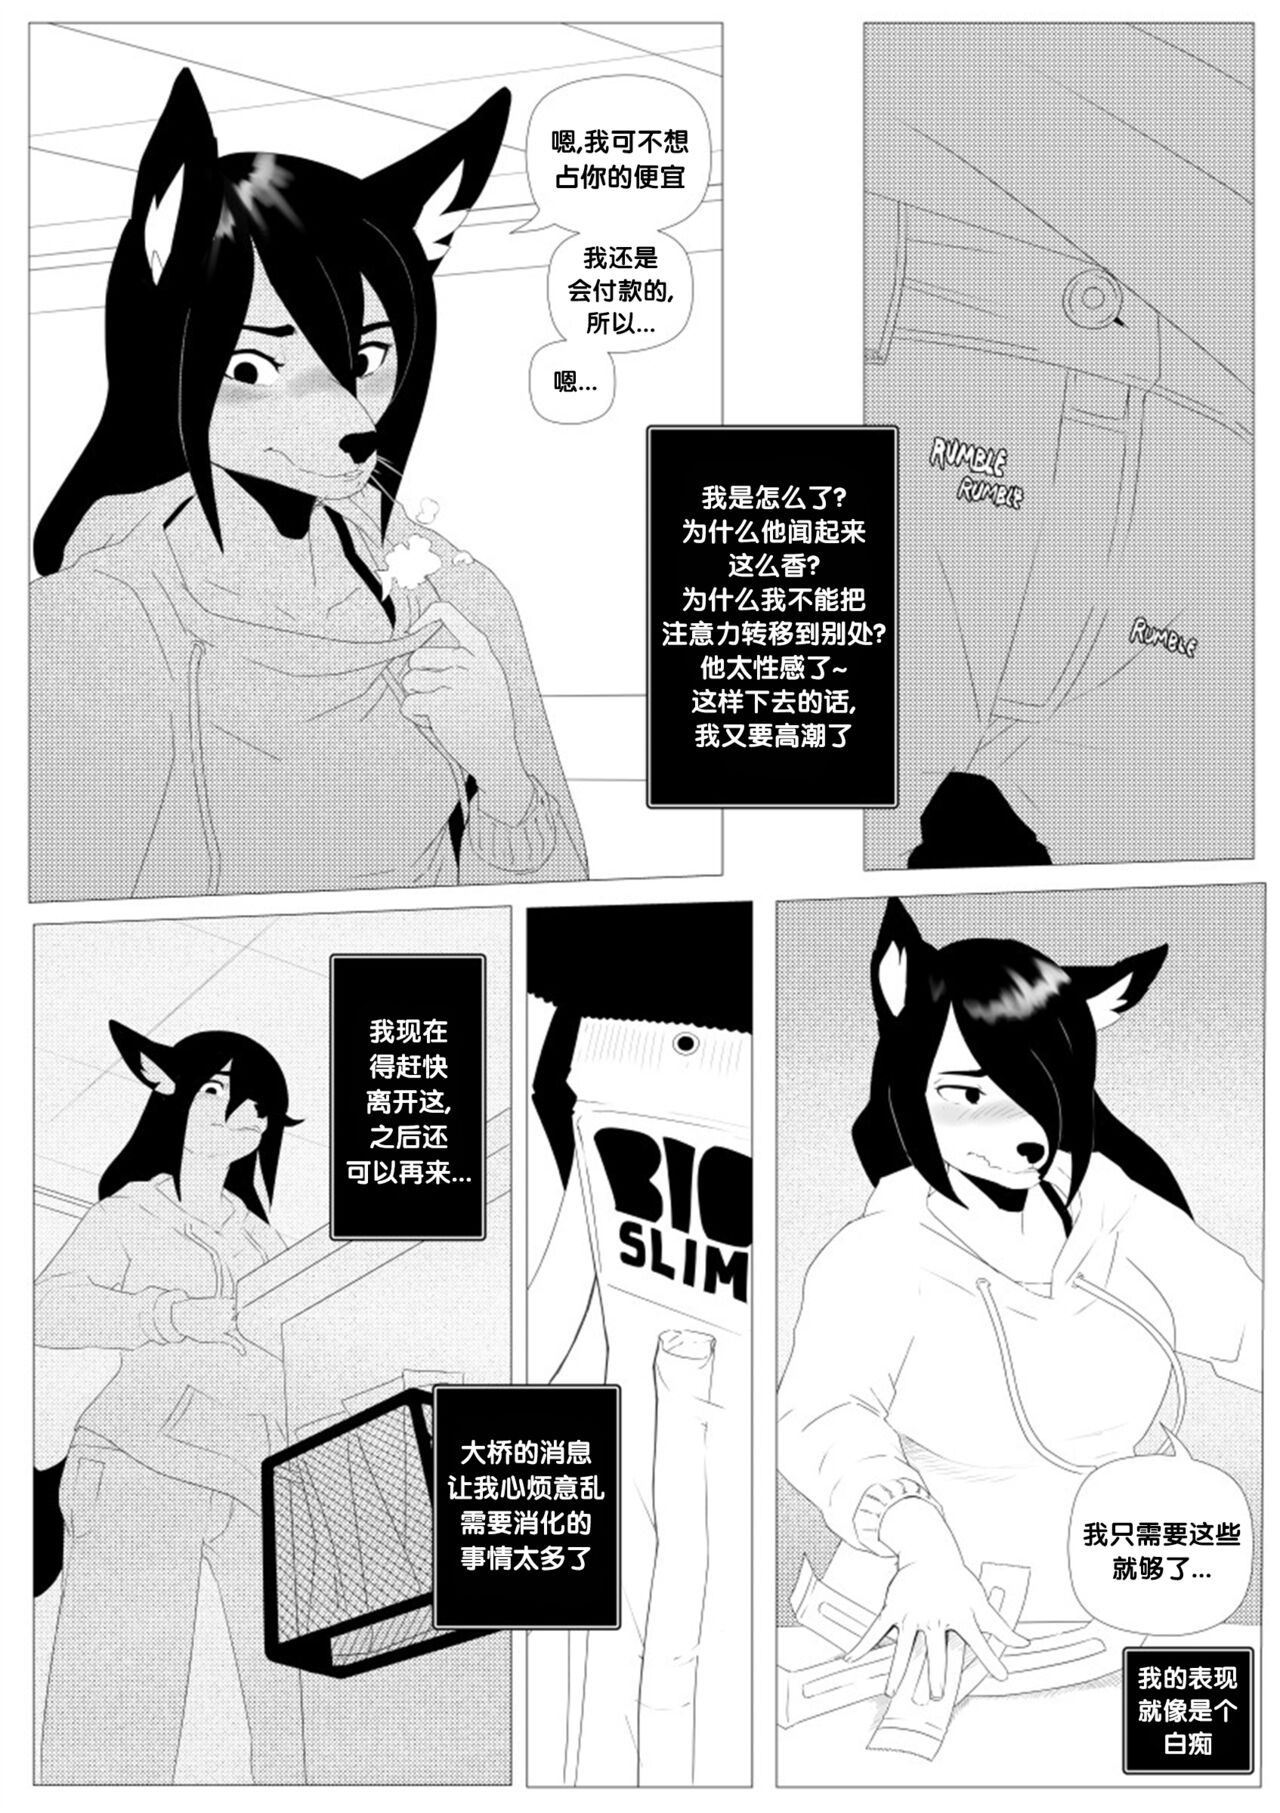 [Corablue] The Cell CH1 [Ongoing] [Chinese] [梅水瓶汉化] 